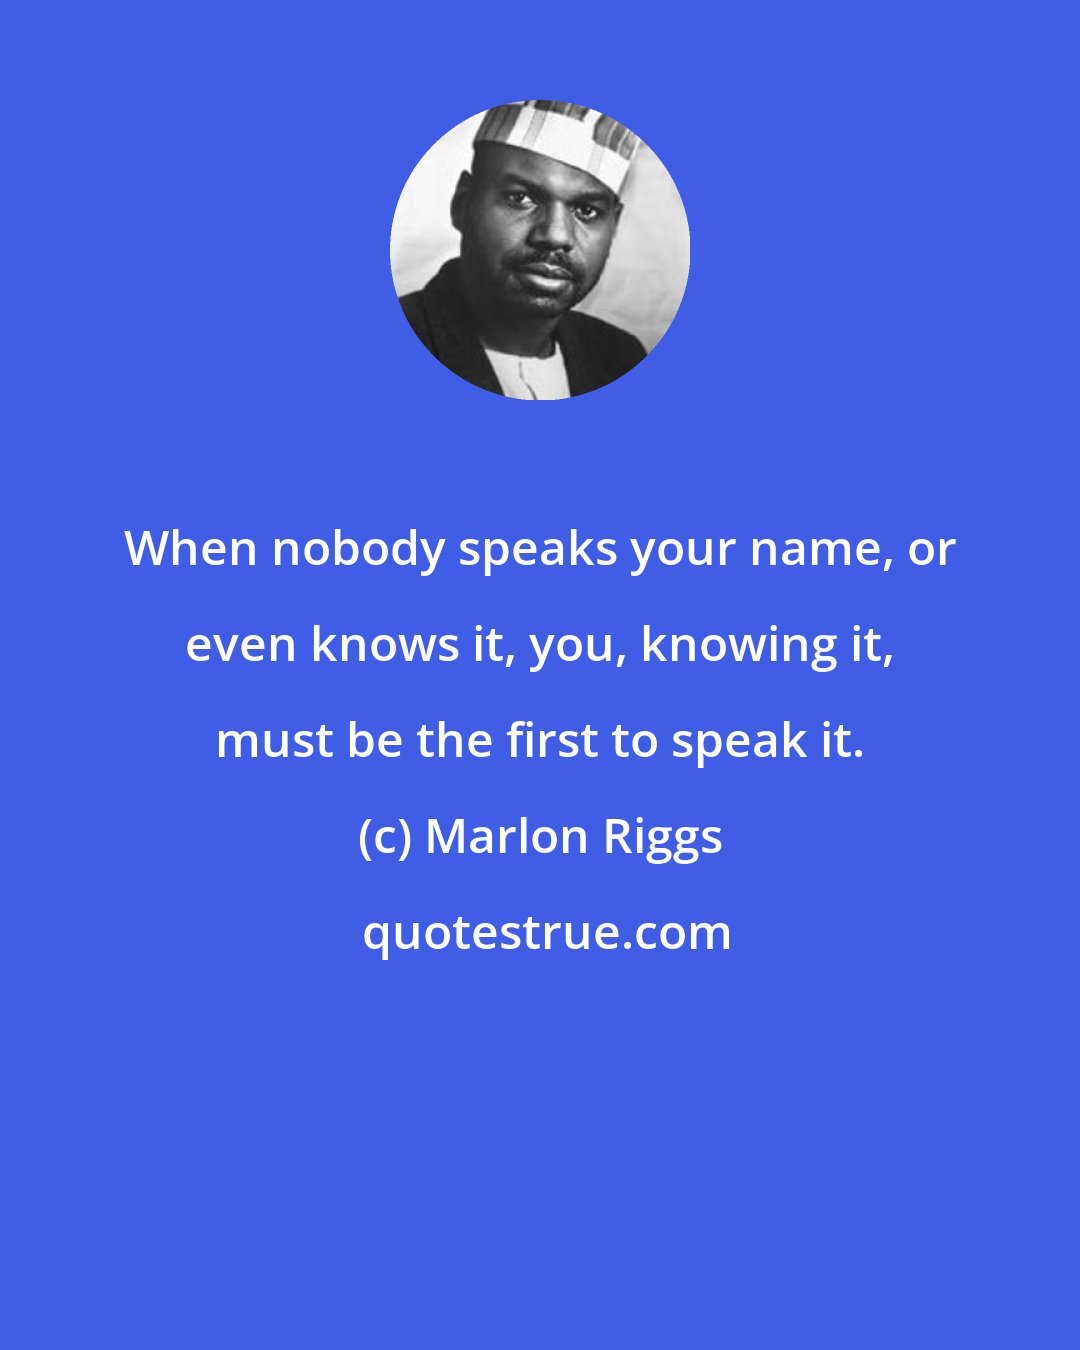 Marlon Riggs: When nobody speaks your name, or even knows it, you, knowing it, must be the first to speak it.